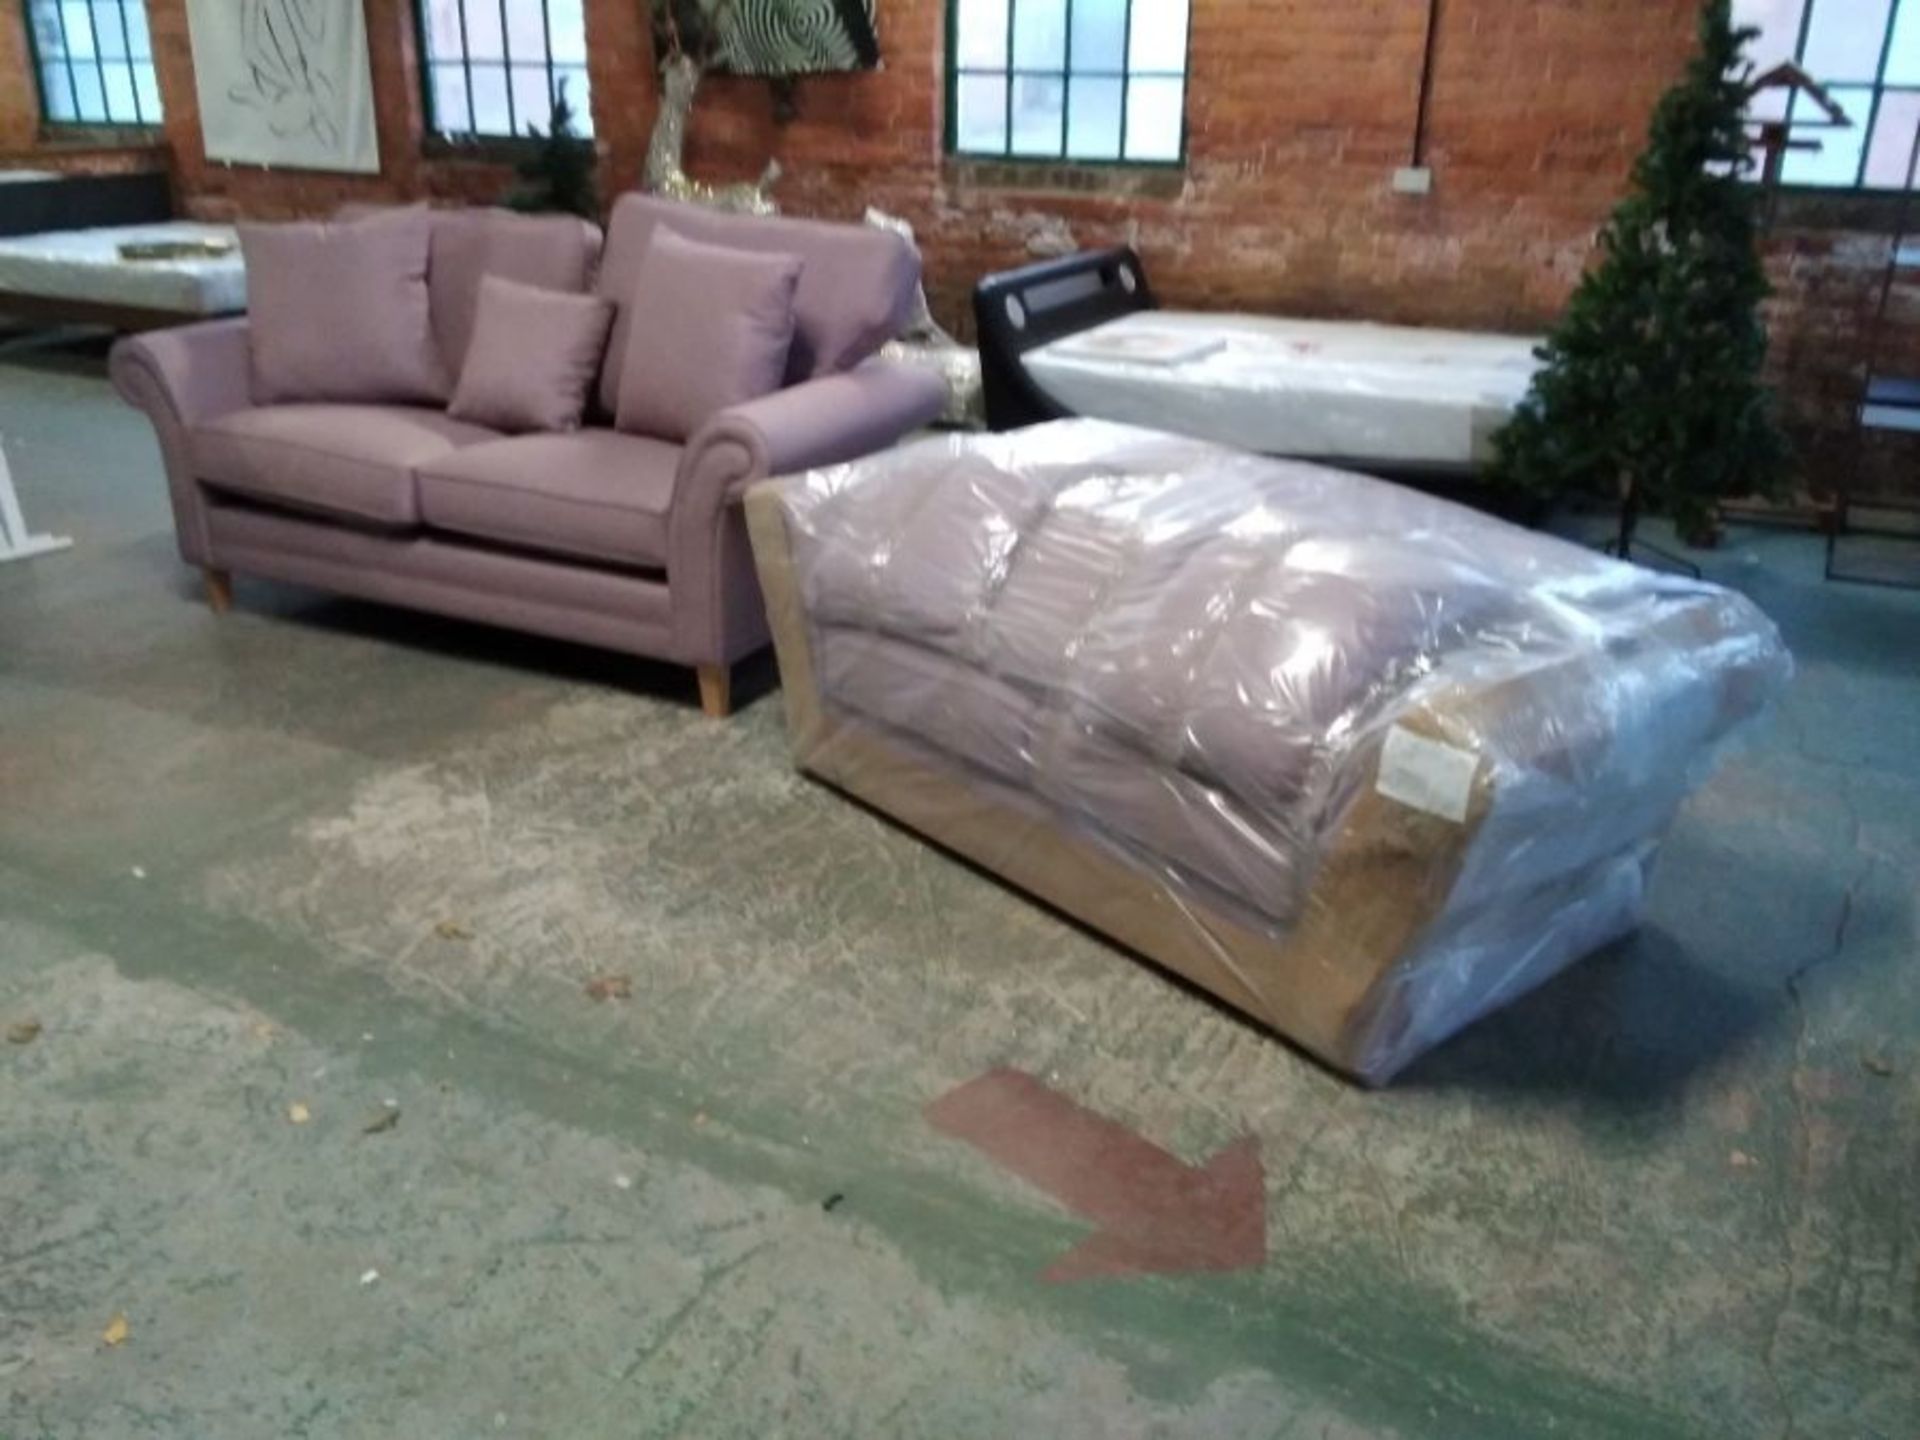 EX SHOWROOM MOSTA TWEED PINK 3 SEATER AND 2 SEATER